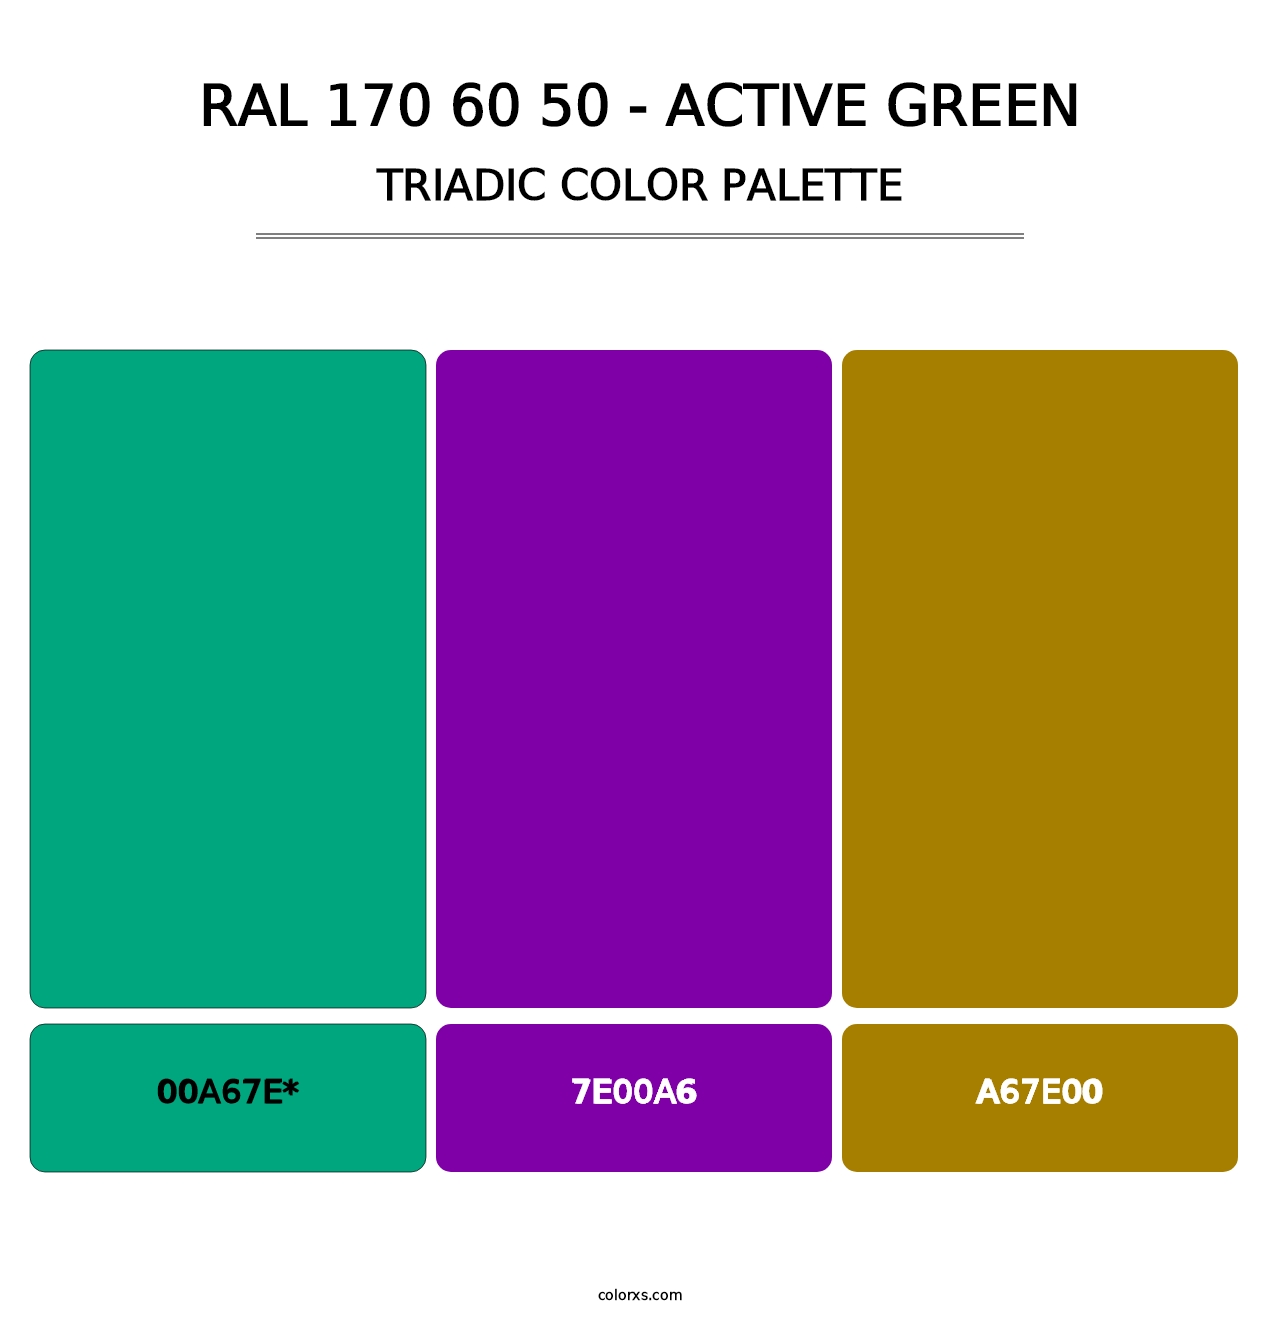 RAL 170 60 50 - Active Green - Triadic Color Palette